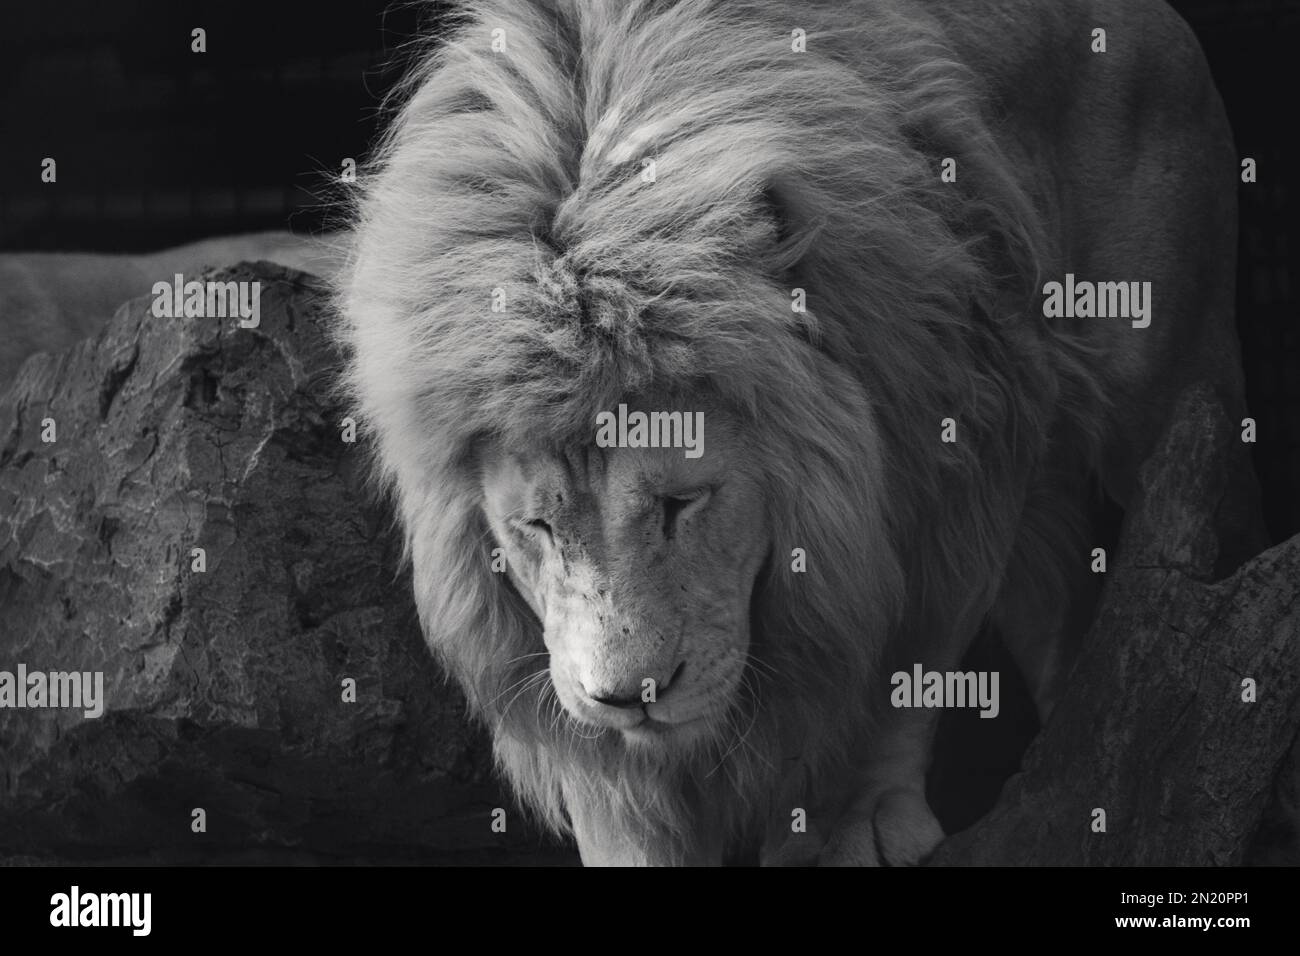 Lion climbing rock and wood trunk in black and white with dark blurred ...